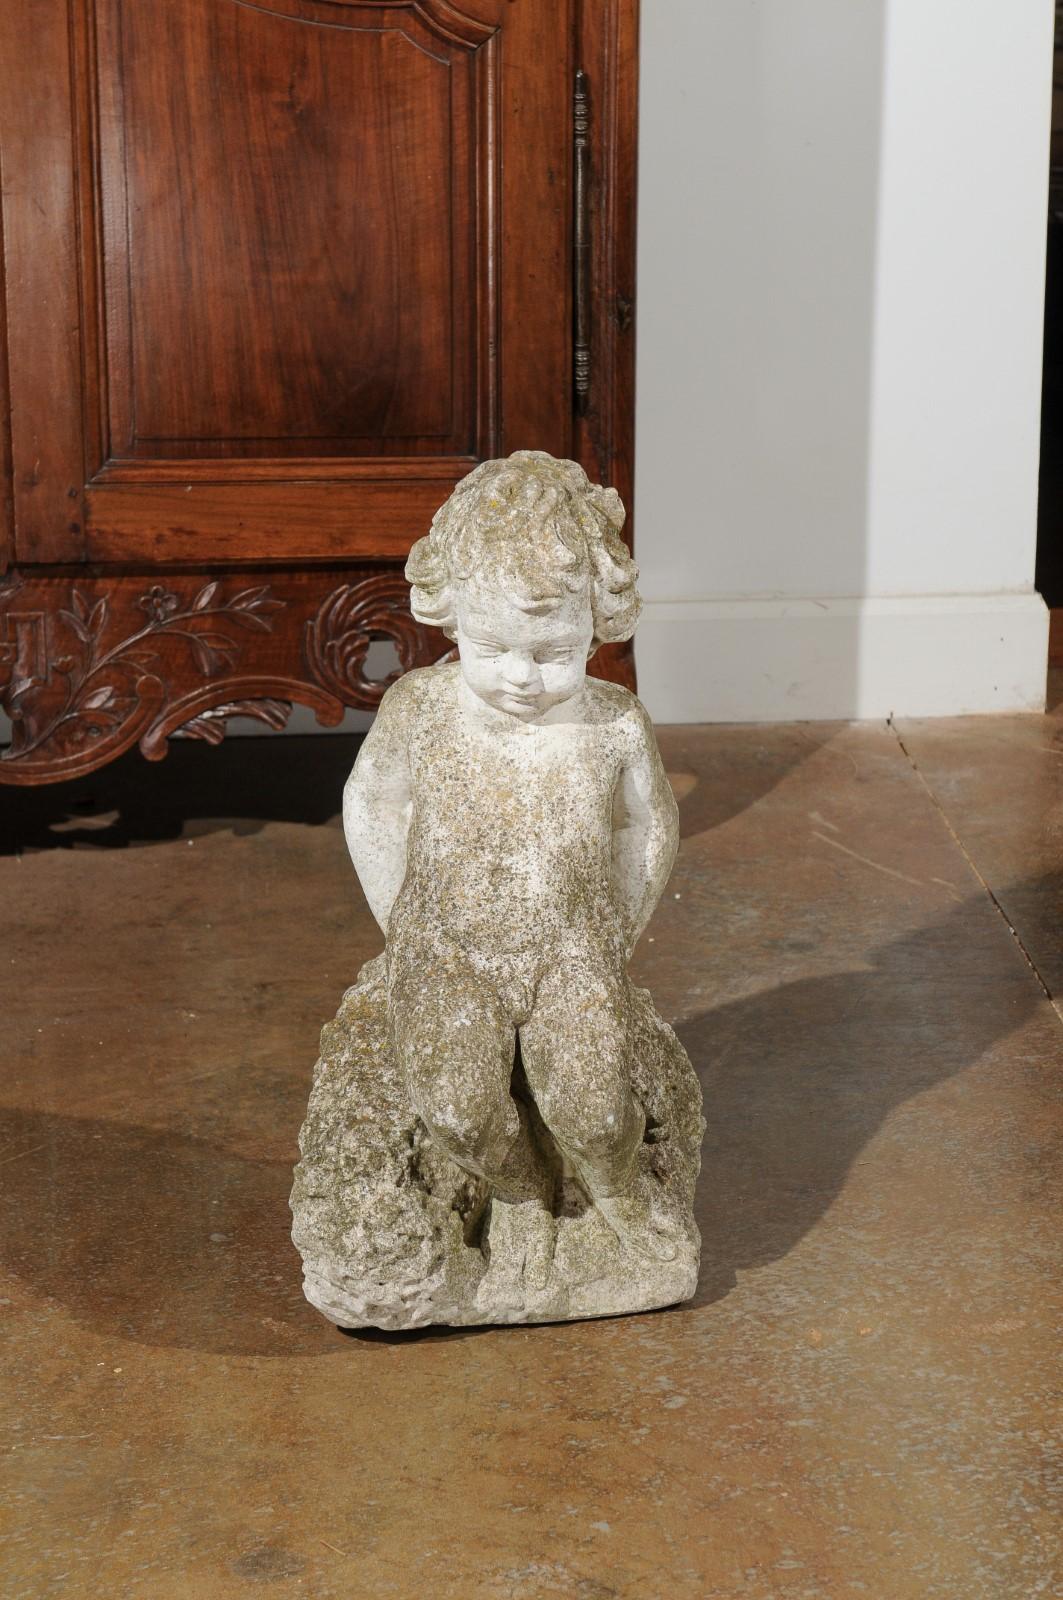 Swedish Carved Stone Garden Sculpture of a Putto Sitting on a Rock, 20th Century For Sale 2